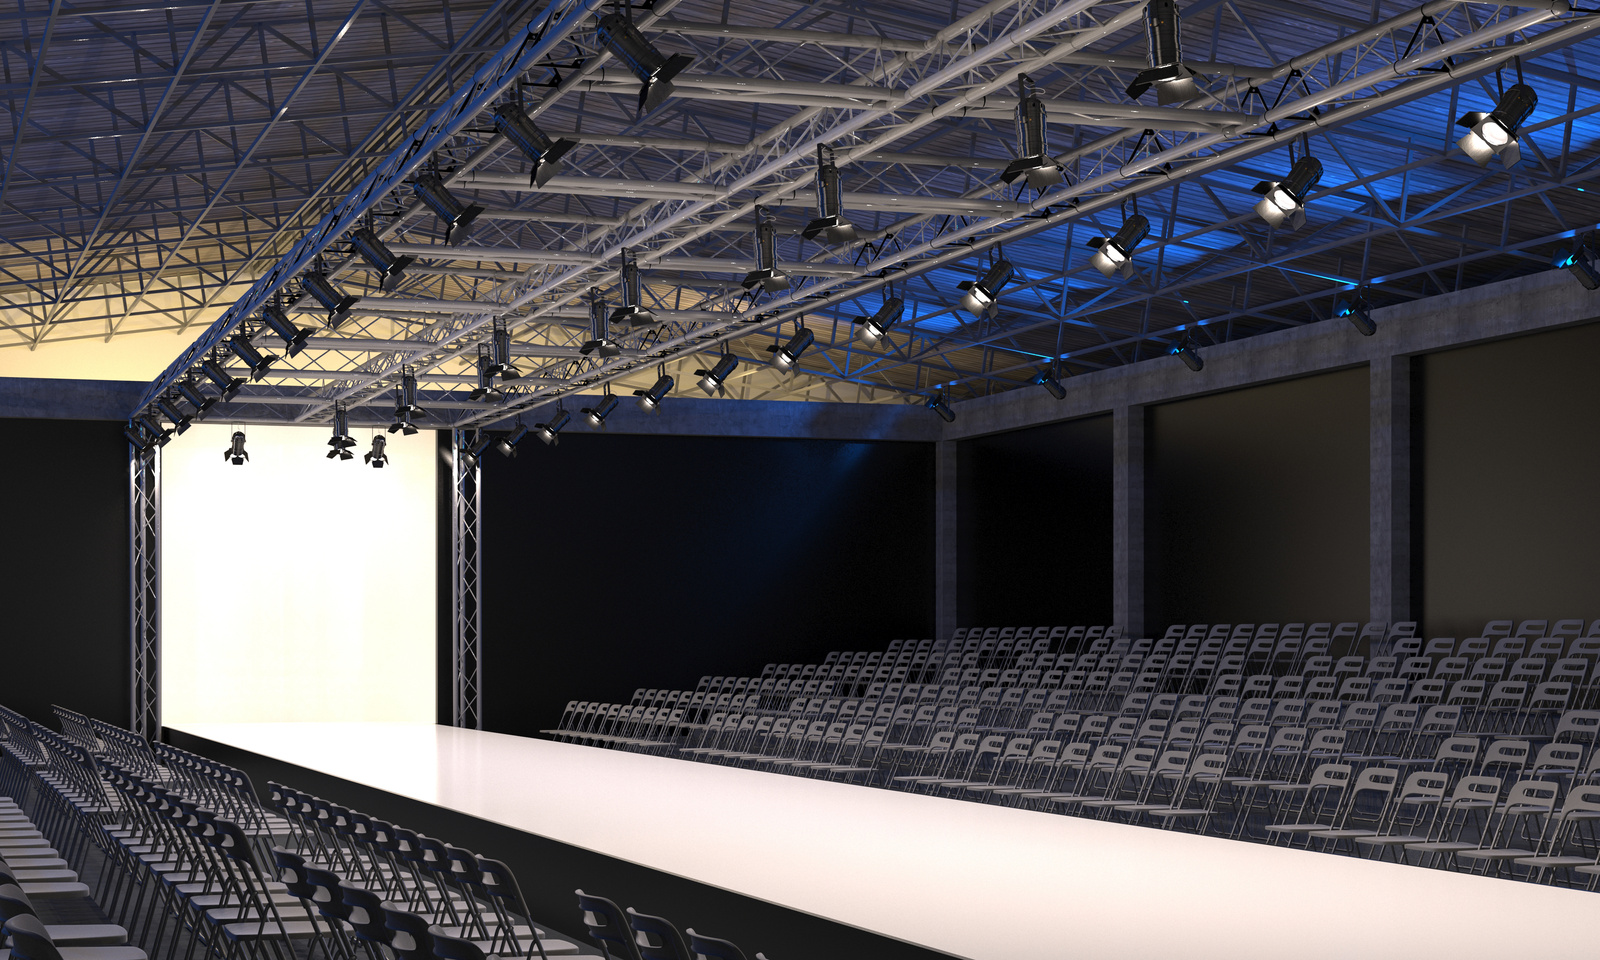 Interior of the auditorium with empty podium for fashion shows. Fashion runway before beginning of fashionable display.